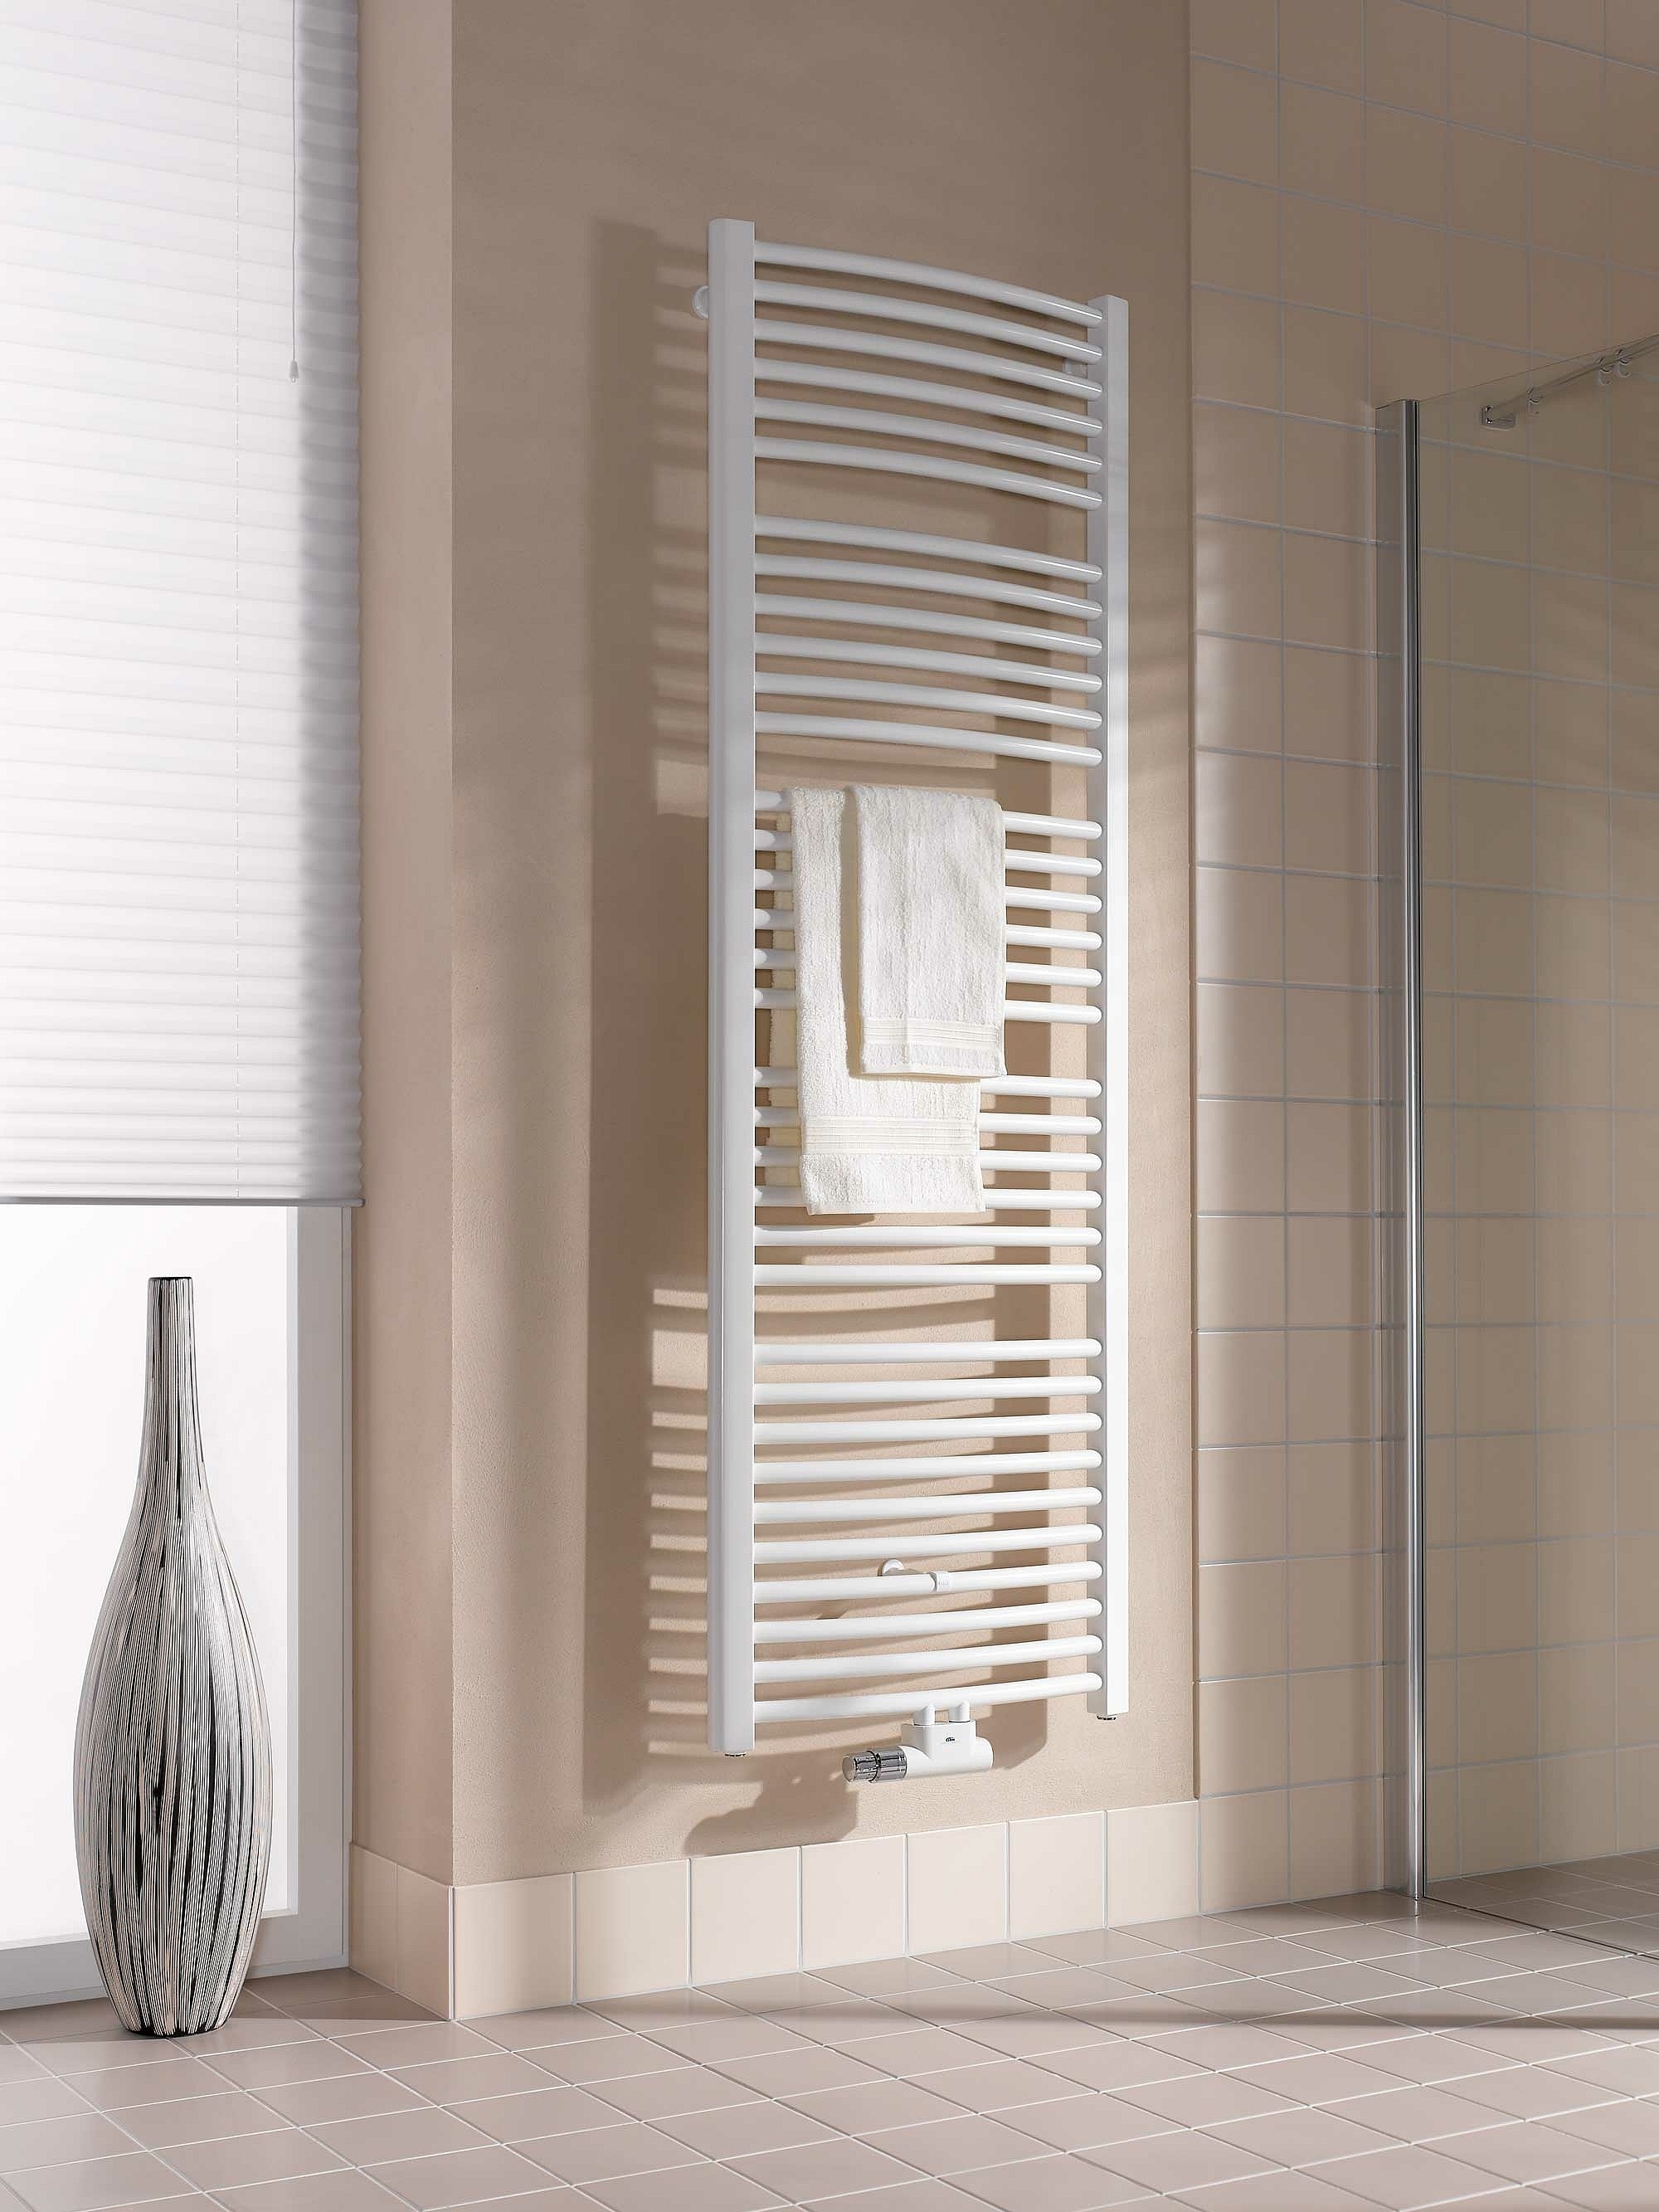 Kermi Basic-50 R design and bathroom radiators – the Basic-50 version with a gentle curve.